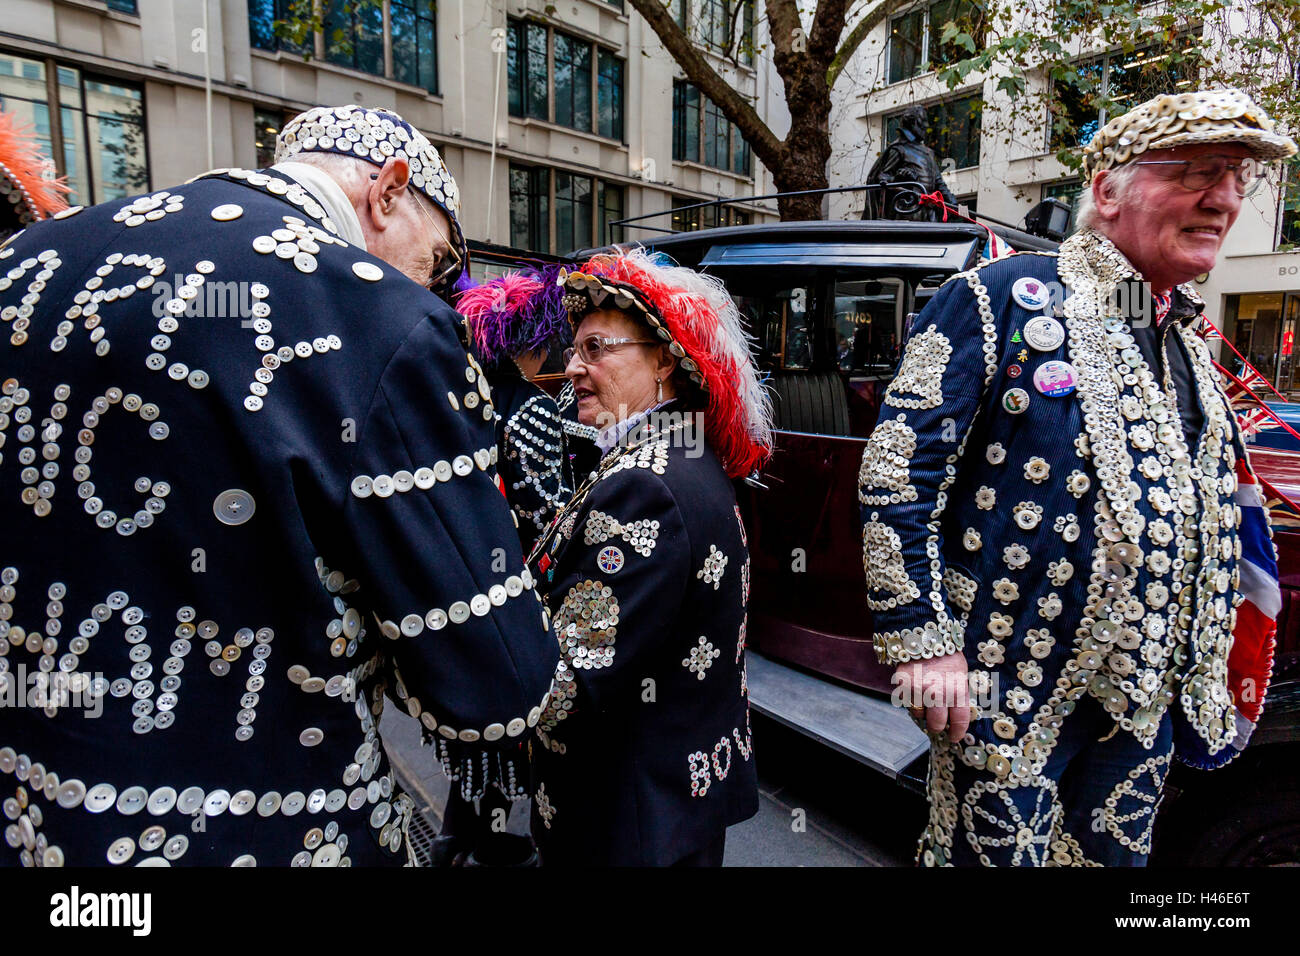 Pearly Kings and Queens Outside The Church Of St Mary-le-Bow (Bow Bells) After The Harvest Festival, London, England Stock Photo